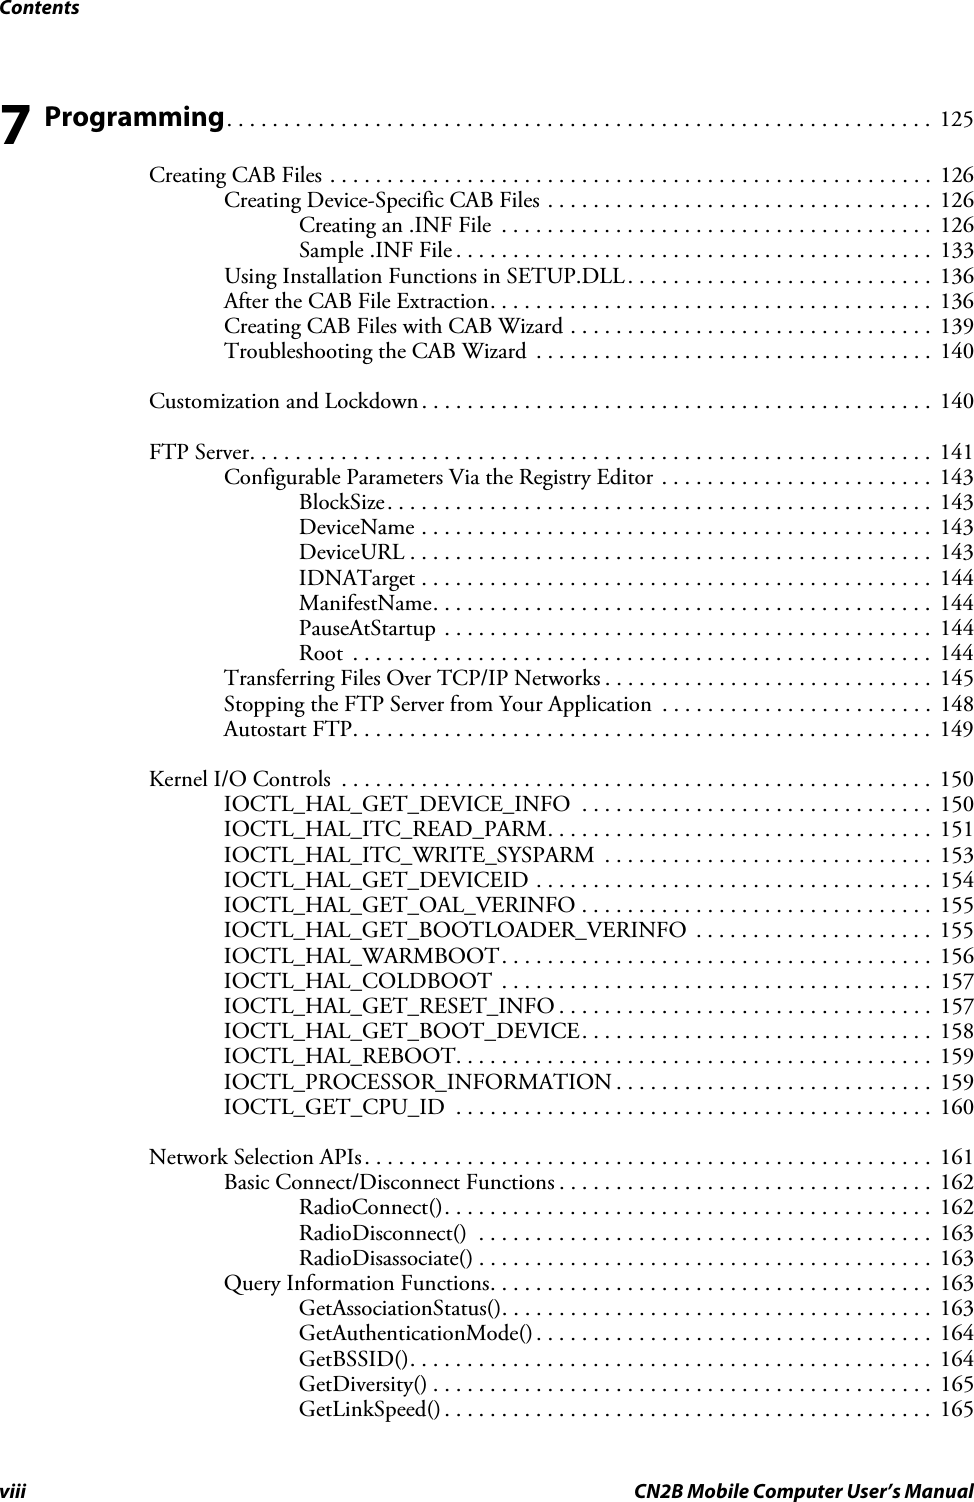 Contentsviii CN2B Mobile Computer User’s Manual7 Programming. . . . . . . . . . . . . . . . . . . . . . . . . . . . . . . . . . . . . . . . . . . . . . . . . . . . . . . . . . . . . .  125Creating CAB Files . . . . . . . . . . . . . . . . . . . . . . . . . . . . . . . . . . . . . . . . . . . . . . . . . . . . .  126Creating Device-Specific CAB Files . . . . . . . . . . . . . . . . . . . . . . . . . . . . . . . . . .  126Creating an .INF File  . . . . . . . . . . . . . . . . . . . . . . . . . . . . . . . . . . . . . .  126Sample .INF File . . . . . . . . . . . . . . . . . . . . . . . . . . . . . . . . . . . . . . . . . .  133Using Installation Functions in SETUP.DLL. . . . . . . . . . . . . . . . . . . . . . . . . . .  136After the CAB File Extraction. . . . . . . . . . . . . . . . . . . . . . . . . . . . . . . . . . . . . . .  136Creating CAB Files with CAB Wizard . . . . . . . . . . . . . . . . . . . . . . . . . . . . . . . .  139Troubleshooting the CAB Wizard  . . . . . . . . . . . . . . . . . . . . . . . . . . . . . . . . . . .  140Customization and Lockdown . . . . . . . . . . . . . . . . . . . . . . . . . . . . . . . . . . . . . . . . . . . . .  140FTP Server. . . . . . . . . . . . . . . . . . . . . . . . . . . . . . . . . . . . . . . . . . . . . . . . . . . . . . . . . . . .  141Configurable Parameters Via the Registry Editor . . . . . . . . . . . . . . . . . . . . . . . .  143BlockSize. . . . . . . . . . . . . . . . . . . . . . . . . . . . . . . . . . . . . . . . . . . . . . . .  143DeviceName . . . . . . . . . . . . . . . . . . . . . . . . . . . . . . . . . . . . . . . . . . . . .  143DeviceURL . . . . . . . . . . . . . . . . . . . . . . . . . . . . . . . . . . . . . . . . . . . . . .  143IDNATarget . . . . . . . . . . . . . . . . . . . . . . . . . . . . . . . . . . . . . . . . . . . . .  144ManifestName. . . . . . . . . . . . . . . . . . . . . . . . . . . . . . . . . . . . . . . . . . . .  144PauseAtStartup . . . . . . . . . . . . . . . . . . . . . . . . . . . . . . . . . . . . . . . . . . .  144Root  . . . . . . . . . . . . . . . . . . . . . . . . . . . . . . . . . . . . . . . . . . . . . . . . . . .  144Transferring Files Over TCP/IP Networks . . . . . . . . . . . . . . . . . . . . . . . . . . . . .  145Stopping the FTP Server from Your Application  . . . . . . . . . . . . . . . . . . . . . . . .  148Autostart FTP. . . . . . . . . . . . . . . . . . . . . . . . . . . . . . . . . . . . . . . . . . . . . . . . . . .  149Kernel I/O Controls  . . . . . . . . . . . . . . . . . . . . . . . . . . . . . . . . . . . . . . . . . . . . . . . . . . . . 150IOCTL_HAL_GET_DEVICE_INFO  . . . . . . . . . . . . . . . . . . . . . . . . . . . . . . .  150IOCTL_HAL_ITC_READ_PARM. . . . . . . . . . . . . . . . . . . . . . . . . . . . . . . . . .  151IOCTL_HAL_ITC_WRITE_SYSPARM  . . . . . . . . . . . . . . . . . . . . . . . . . . . . .  153IOCTL_HAL_GET_DEVICEID . . . . . . . . . . . . . . . . . . . . . . . . . . . . . . . . . . .  154IOCTL_HAL_GET_OAL_VERINFO . . . . . . . . . . . . . . . . . . . . . . . . . . . . . . .  155IOCTL_HAL_GET_BOOTLOADER_VERINFO  . . . . . . . . . . . . . . . . . . . . .  155IOCTL_HAL_WARMBOOT. . . . . . . . . . . . . . . . . . . . . . . . . . . . . . . . . . . . . .  156IOCTL_HAL_COLDBOOT  . . . . . . . . . . . . . . . . . . . . . . . . . . . . . . . . . . . . . .  157IOCTL_HAL_GET_RESET_INFO . . . . . . . . . . . . . . . . . . . . . . . . . . . . . . . . .  157IOCTL_HAL_GET_BOOT_DEVICE. . . . . . . . . . . . . . . . . . . . . . . . . . . . . . .  158IOCTL_HAL_REBOOT. . . . . . . . . . . . . . . . . . . . . . . . . . . . . . . . . . . . . . . . . .  159IOCTL_PROCESSOR_INFORMATION . . . . . . . . . . . . . . . . . . . . . . . . . . . .  159IOCTL_GET_CPU_ID  . . . . . . . . . . . . . . . . . . . . . . . . . . . . . . . . . . . . . . . . . .  160Network Selection APIs. . . . . . . . . . . . . . . . . . . . . . . . . . . . . . . . . . . . . . . . . . . . . . . . . .  161Basic Connect/Disconnect Functions . . . . . . . . . . . . . . . . . . . . . . . . . . . . . . . . .  162RadioConnect(). . . . . . . . . . . . . . . . . . . . . . . . . . . . . . . . . . . . . . . . . . .  162RadioDisconnect()  . . . . . . . . . . . . . . . . . . . . . . . . . . . . . . . . . . . . . . . .  163RadioDisassociate() . . . . . . . . . . . . . . . . . . . . . . . . . . . . . . . . . . . . . . . .  163Query Information Functions. . . . . . . . . . . . . . . . . . . . . . . . . . . . . . . . . . . . . . .  163GetAssociationStatus(). . . . . . . . . . . . . . . . . . . . . . . . . . . . . . . . . . . . . .  163GetAuthenticationMode(). . . . . . . . . . . . . . . . . . . . . . . . . . . . . . . . . . .  164GetBSSID(). . . . . . . . . . . . . . . . . . . . . . . . . . . . . . . . . . . . . . . . . . . . . .  164GetDiversity() . . . . . . . . . . . . . . . . . . . . . . . . . . . . . . . . . . . . . . . . . . . .  165GetLinkSpeed() . . . . . . . . . . . . . . . . . . . . . . . . . . . . . . . . . . . . . . . . . . .  165